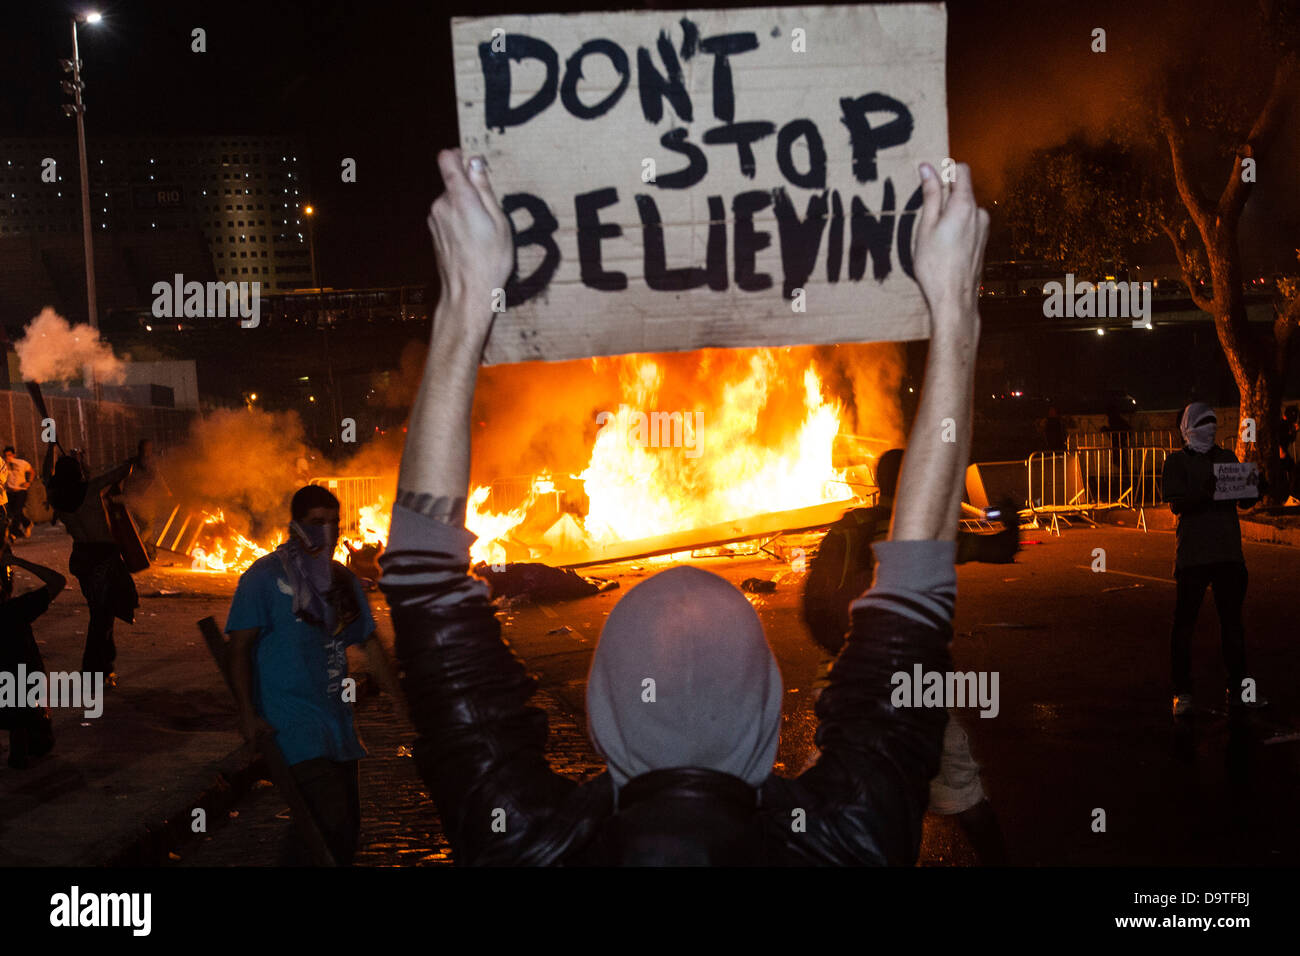 Brazil protest Rio de Janeiro downtown Revolt street vandalized by protesters Don´t stop believing fire for blocking police Stock Photo